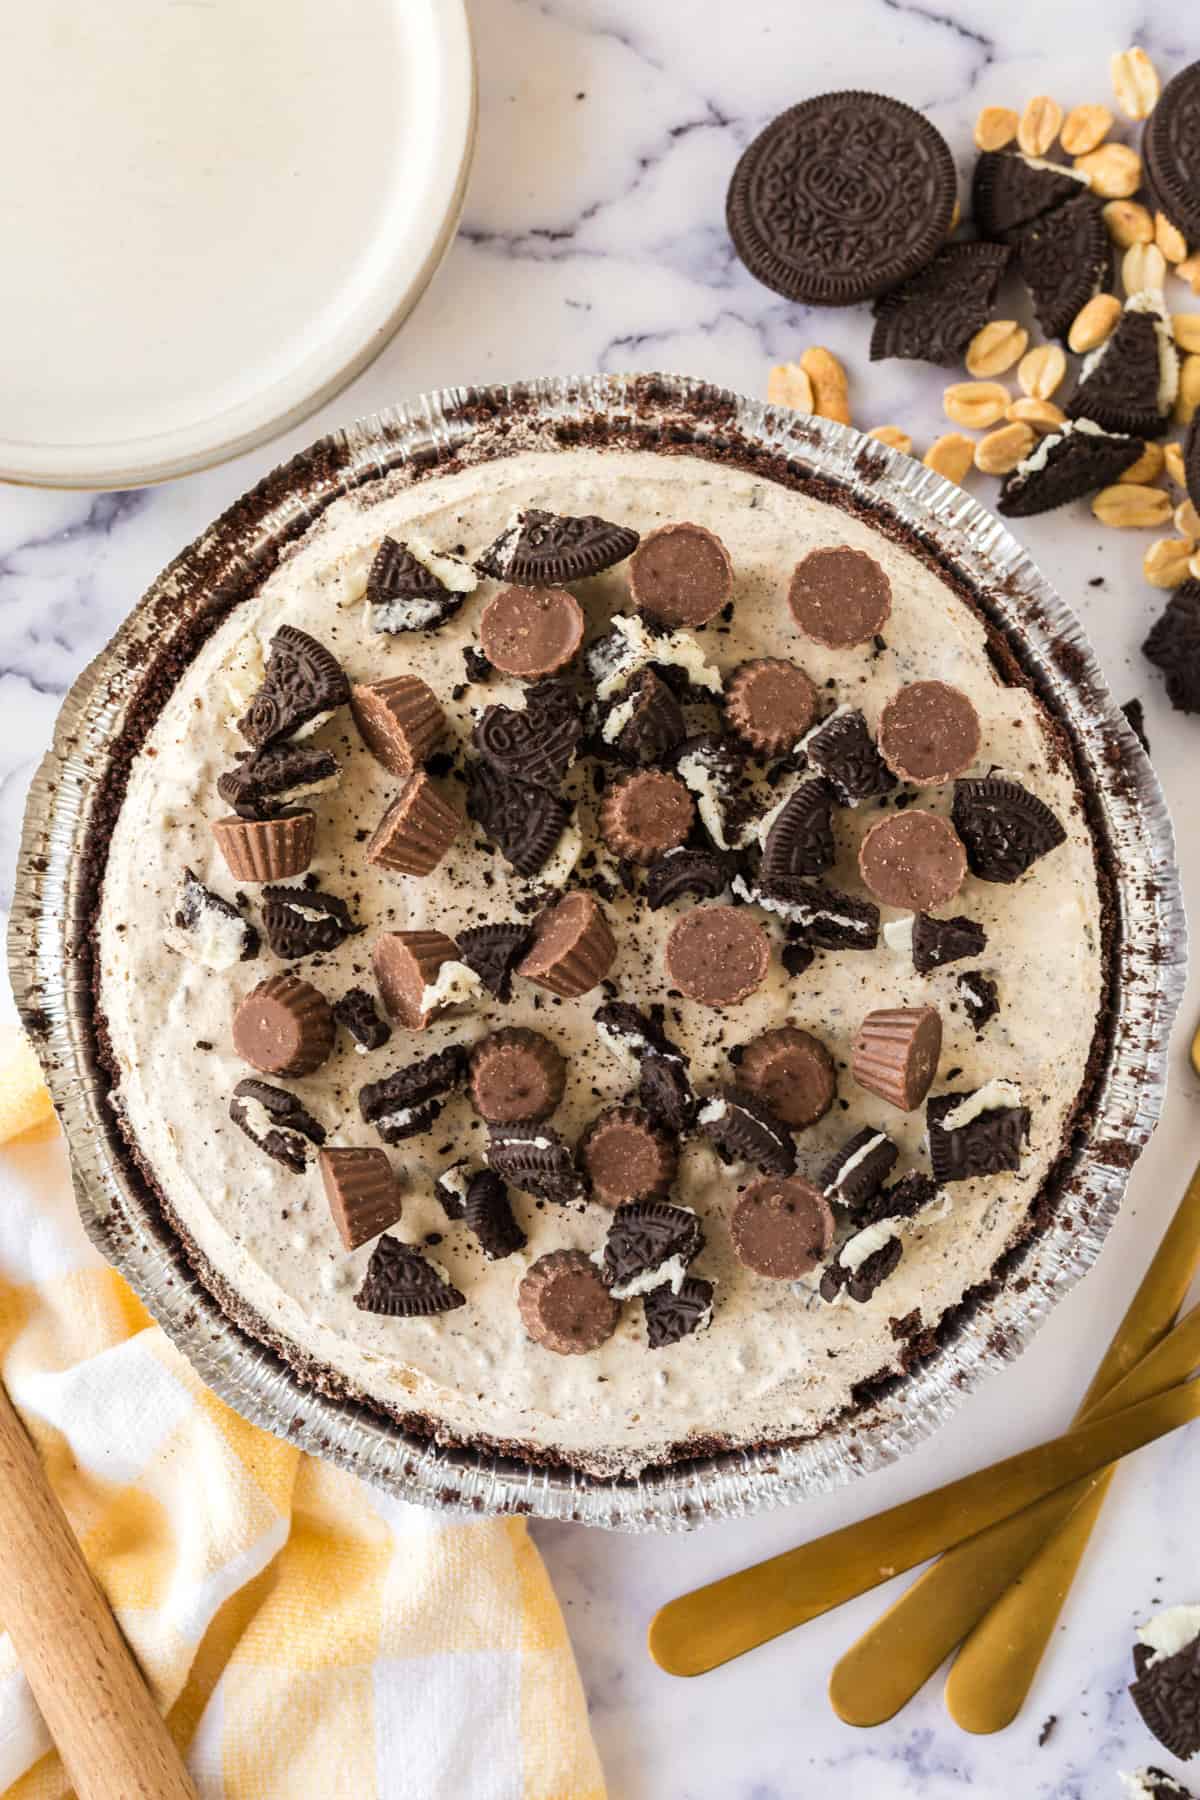 Frozen oreo chocolate peanut butter pie with bought oreo crust.